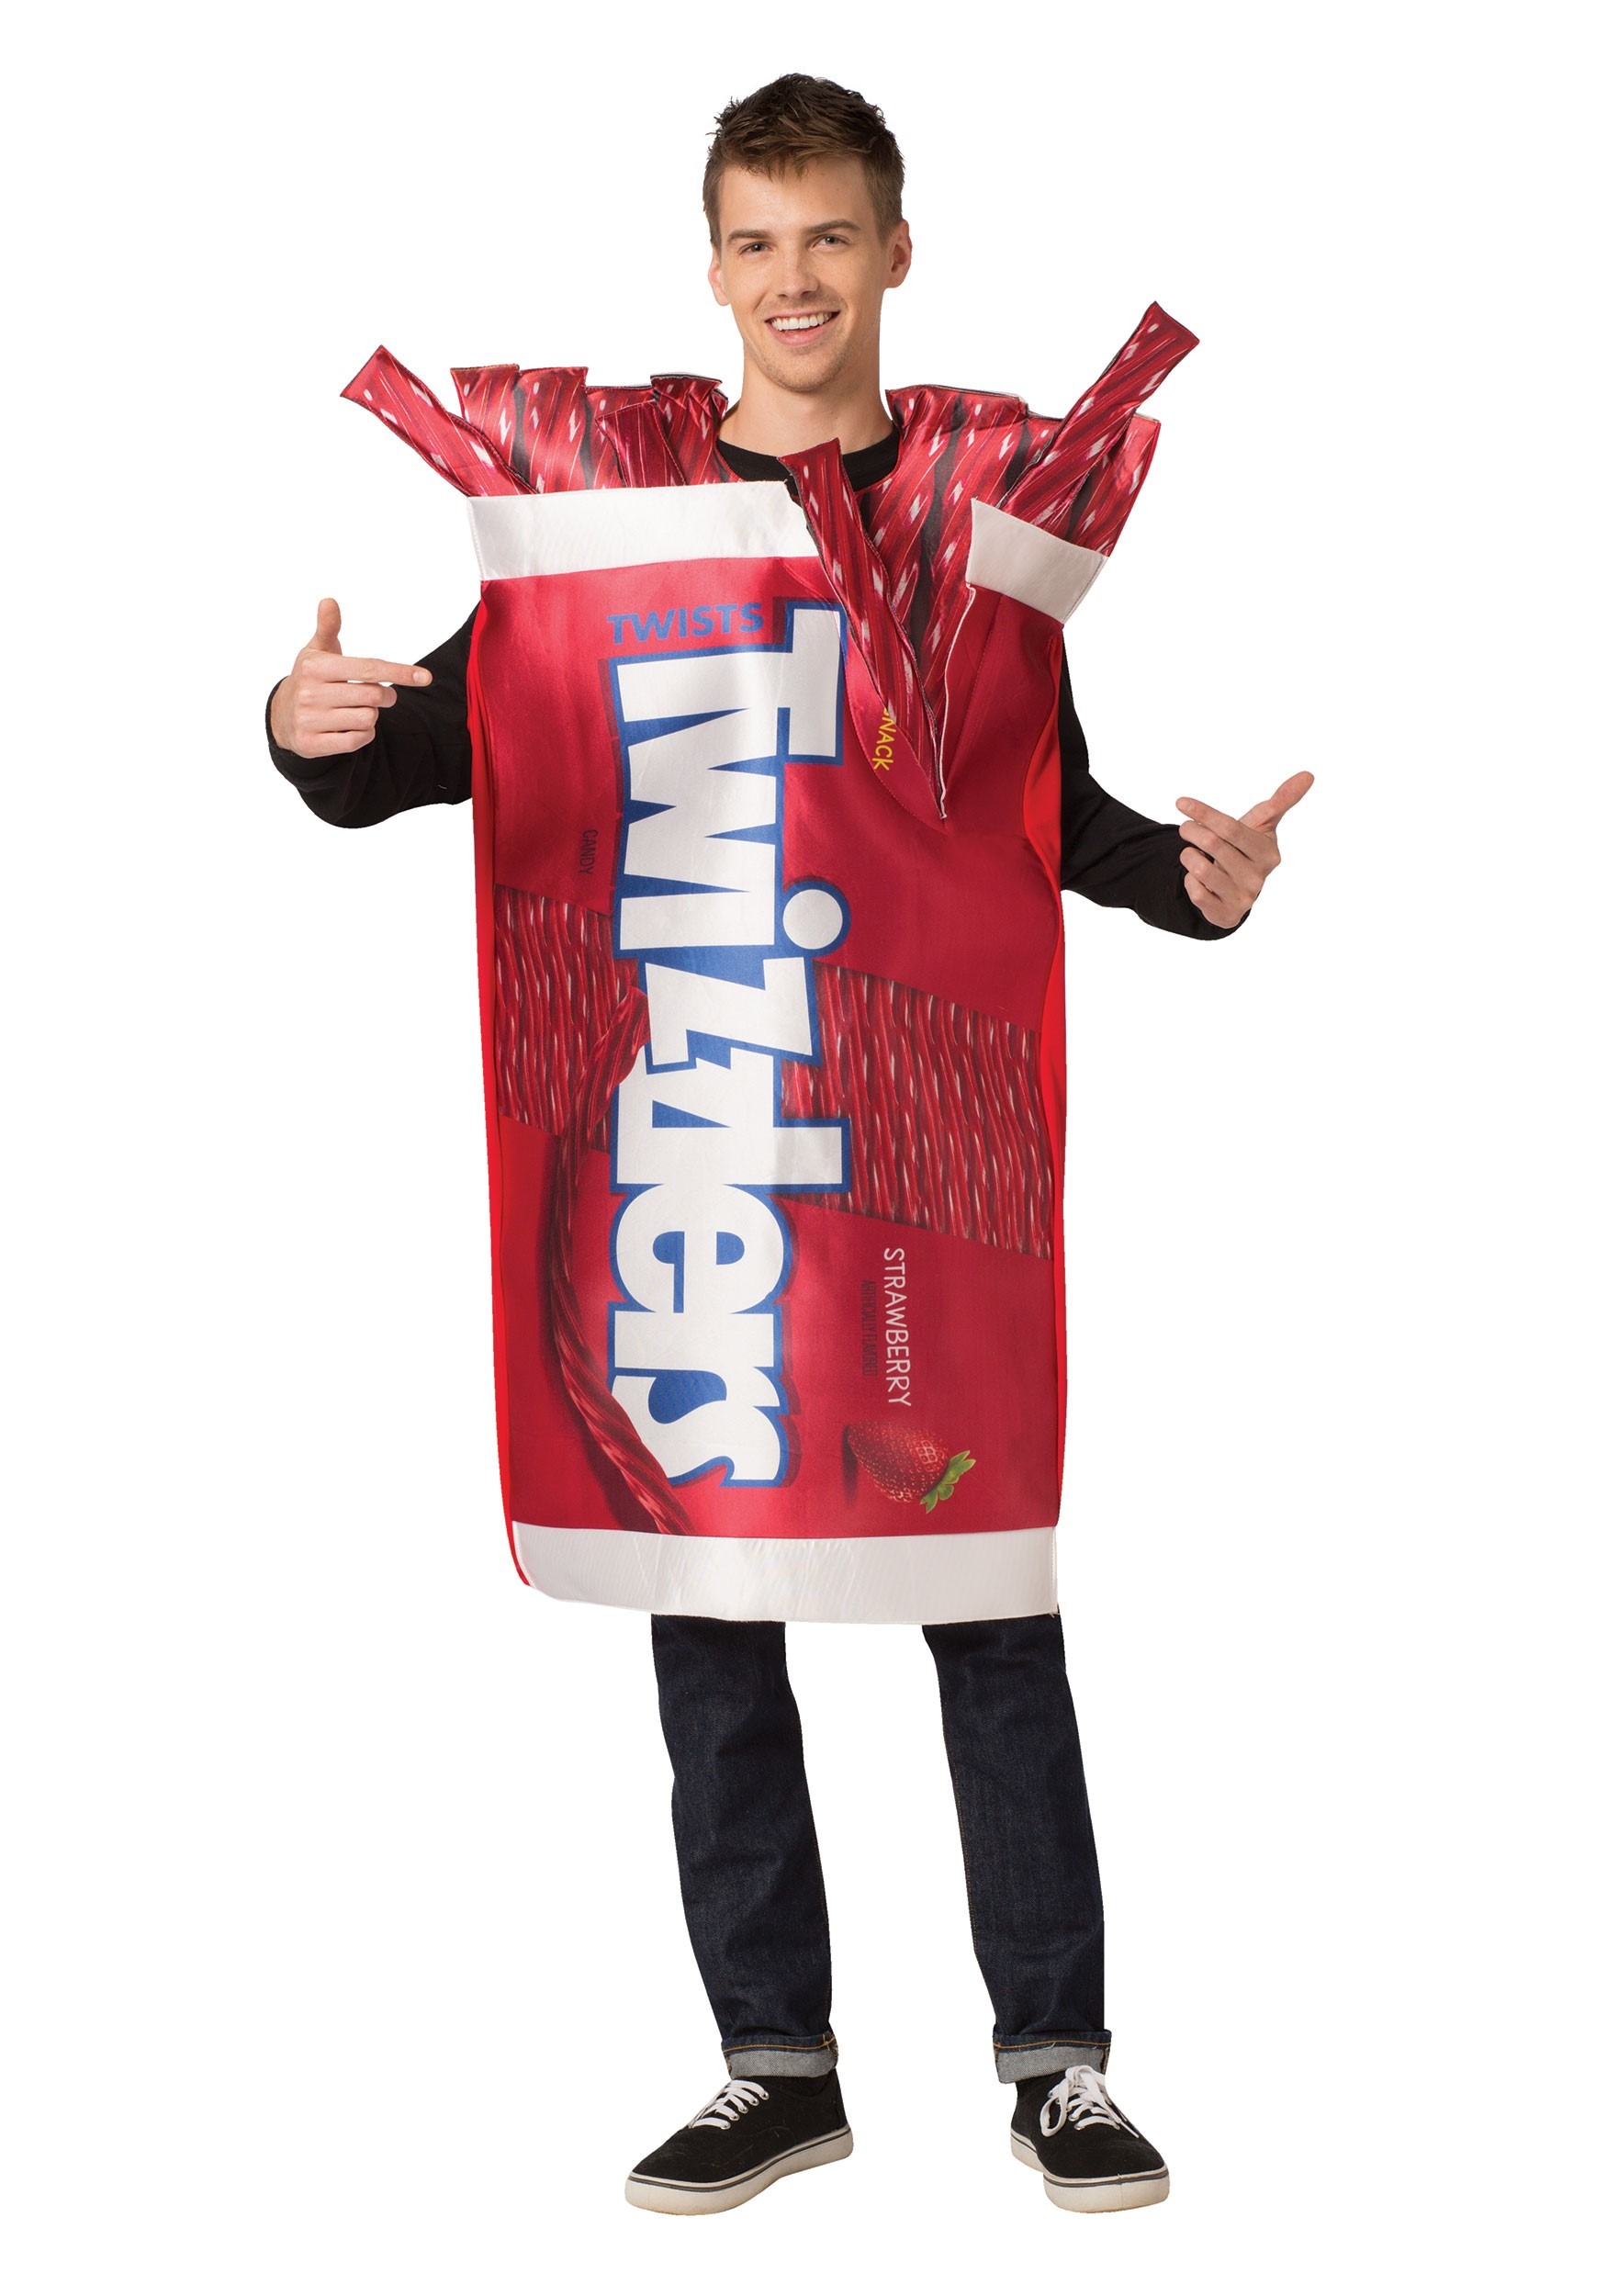 Adult Twizzlers Costume